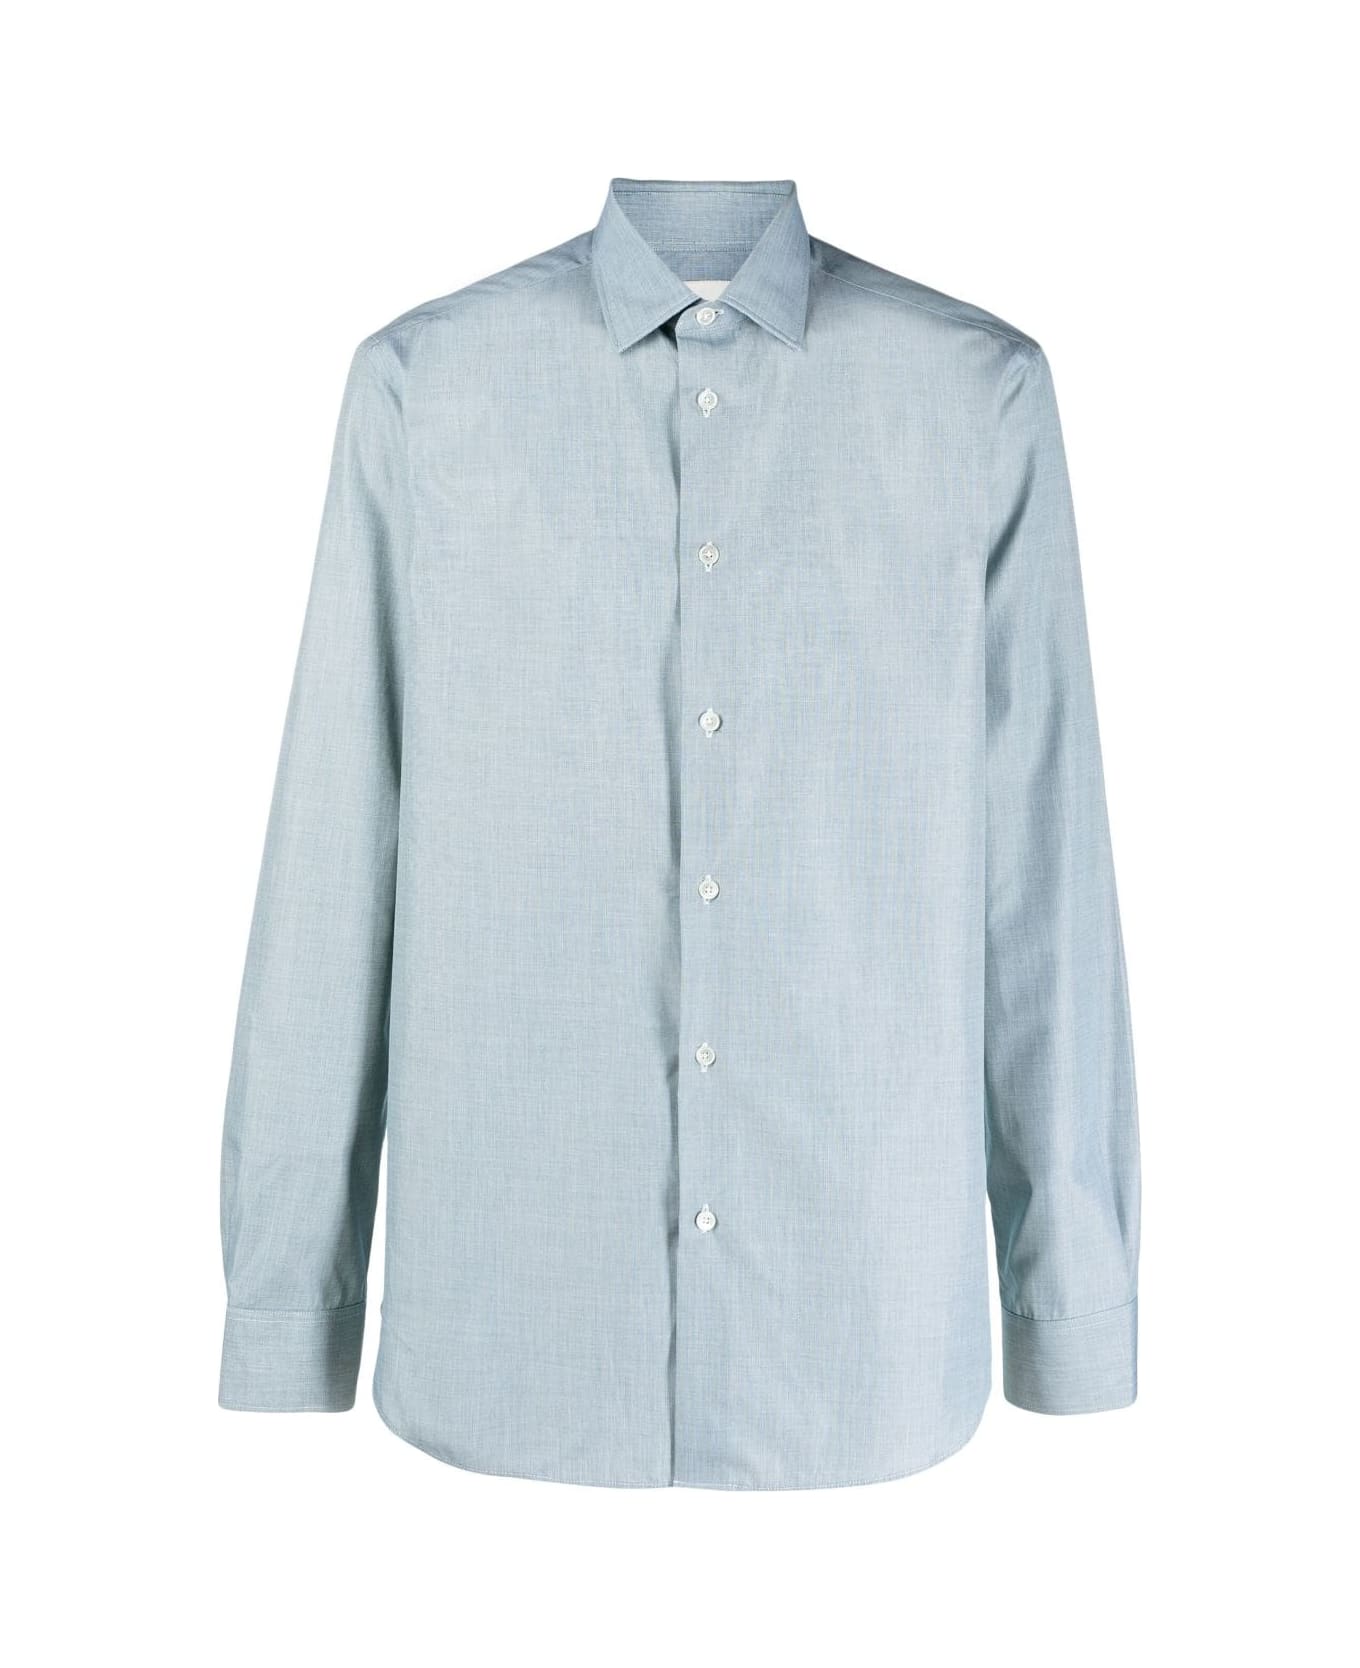 Paul Smith Mens Tailored Fit Shirt - Greens